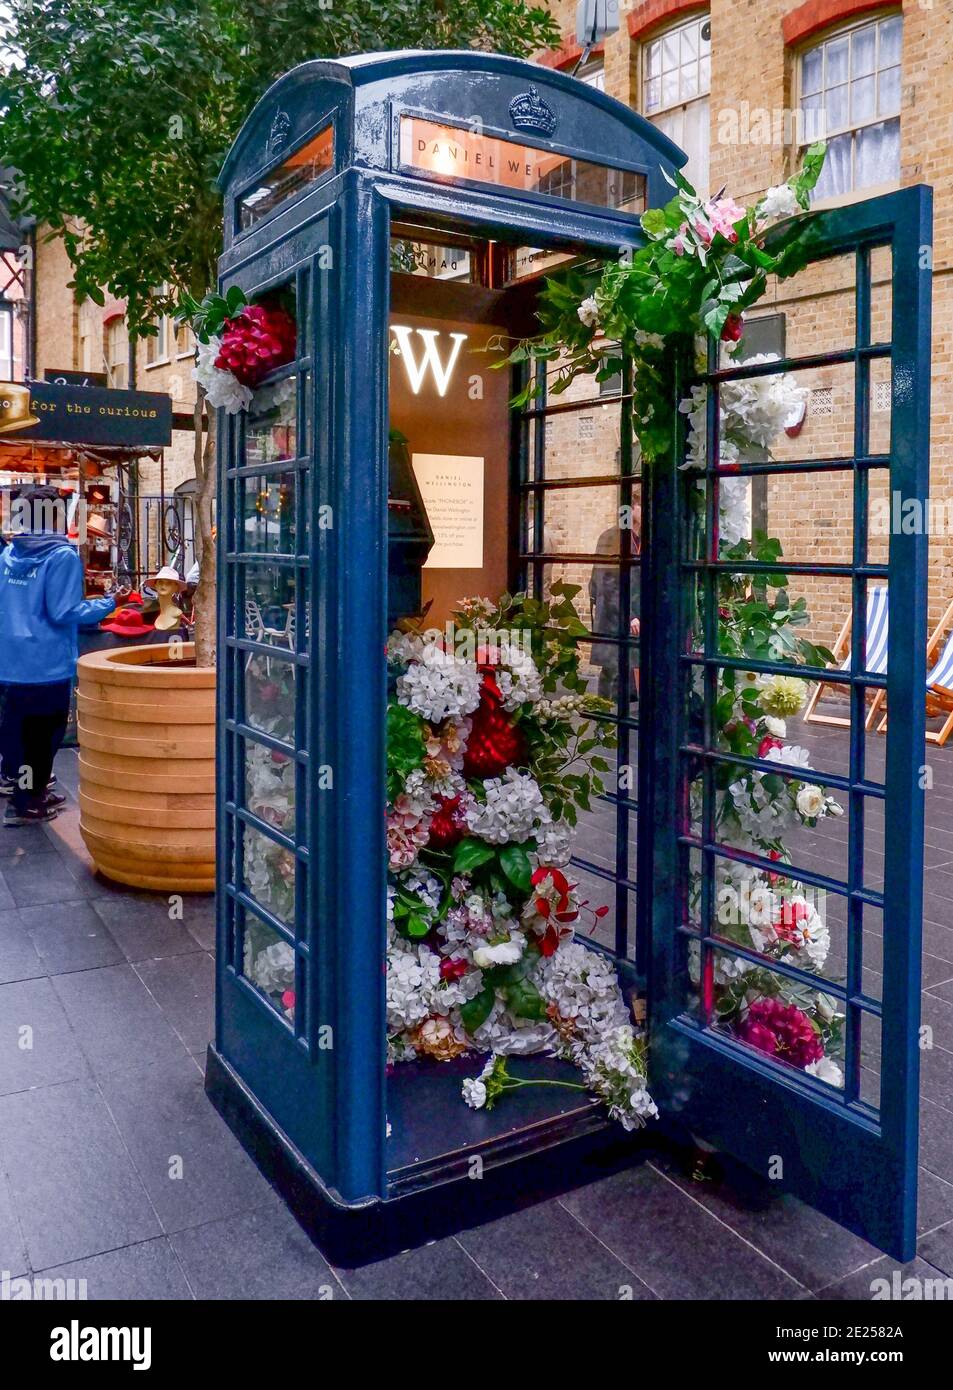 Flower decorated black phone booth with door open sponsored by Daniel  Wellington at Spitalfields Market, East London, UK Stock Photo - Alamy